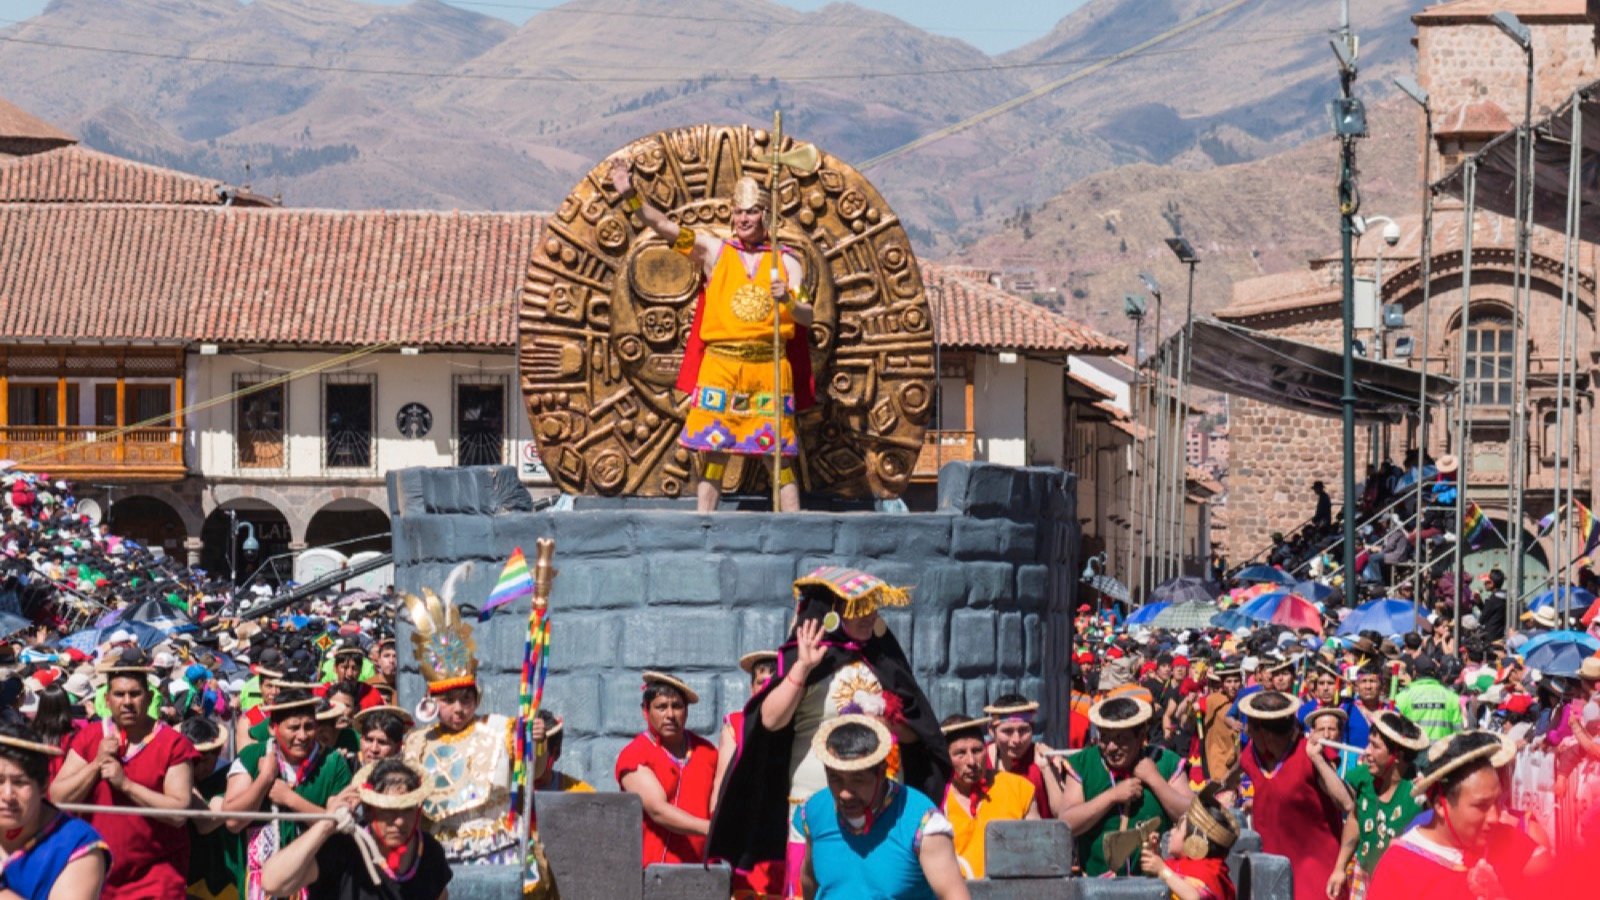 <p>This party held in Cusco is the celebration of the New Year on the Inca calendar. The town has dance performances, colorful parades, and various re-enactments of ancient Inca ceremonies. The festival puts you into a time capsule sent to the past to get an insight into the ancient Inca civilization.</p>